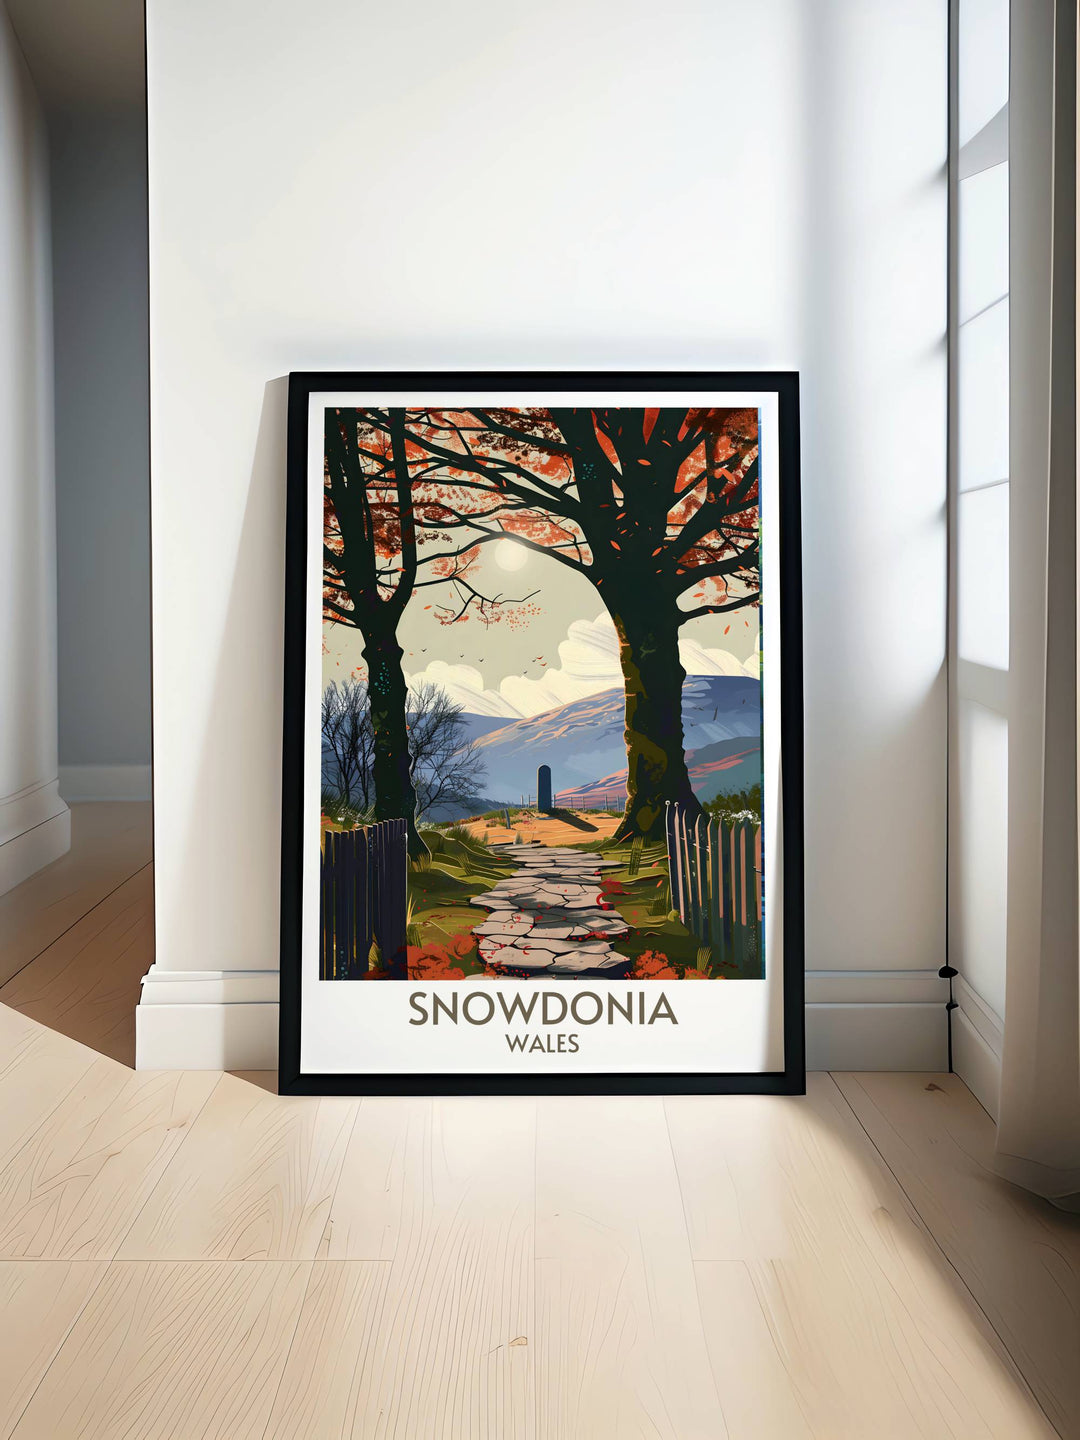 Experience the legend of Galerts Grave with our stunning Snowdonia gallery wall art, capturing the mystique and history of this iconic Welsh landmark. Perfect for adding a touch of folklore and natures beauty to your home decor.